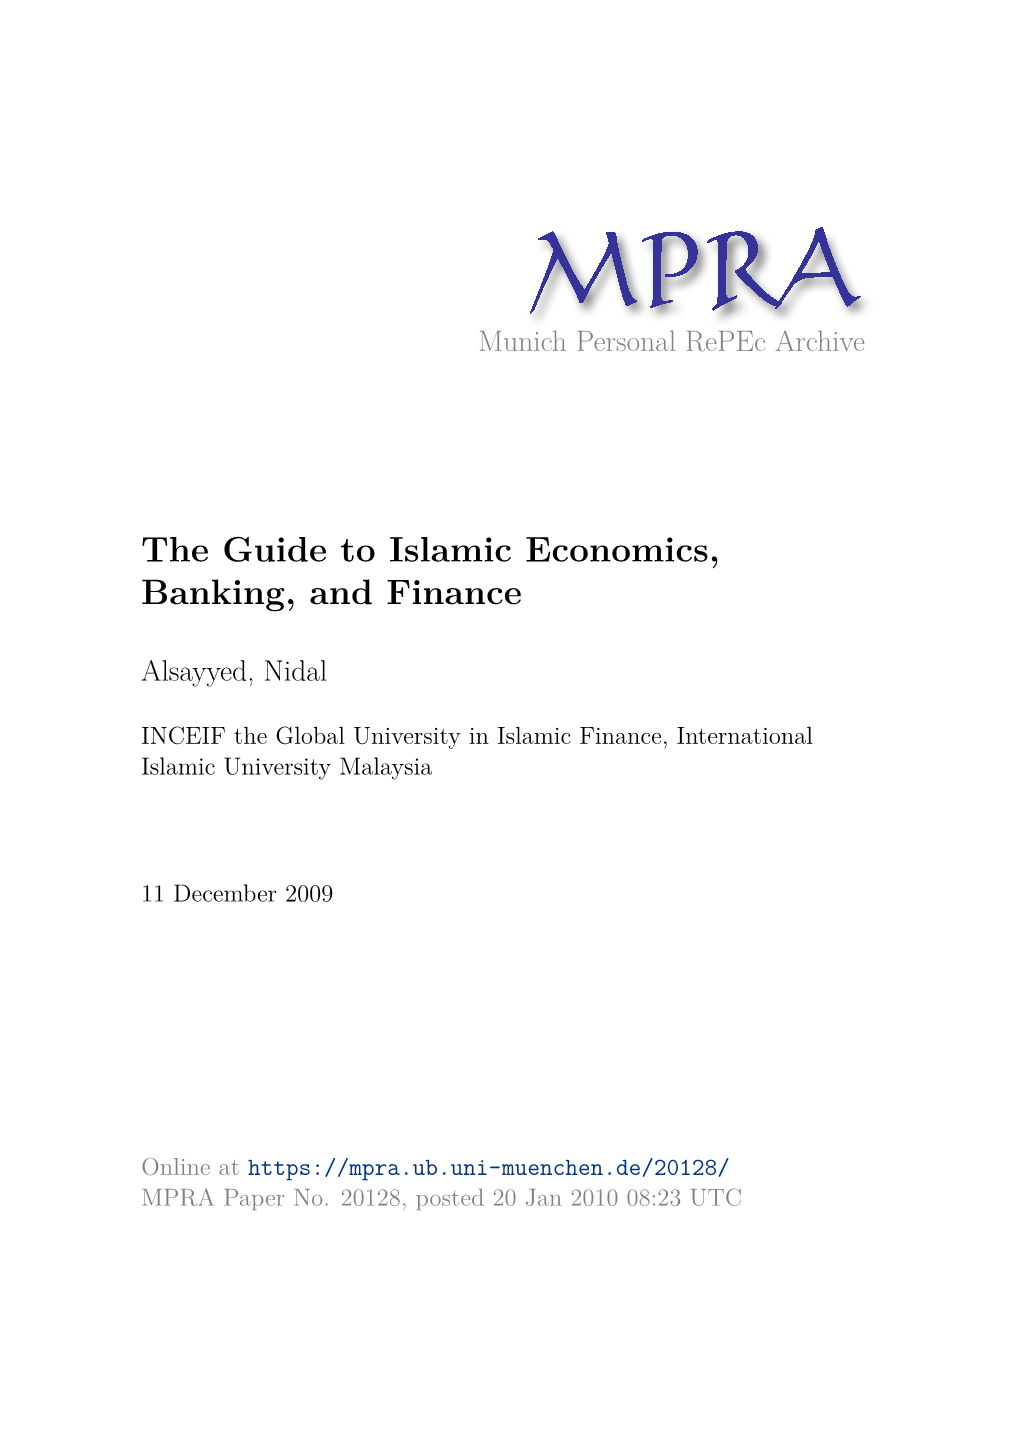 The Guide to Islamic Economics, Banking, and Finance